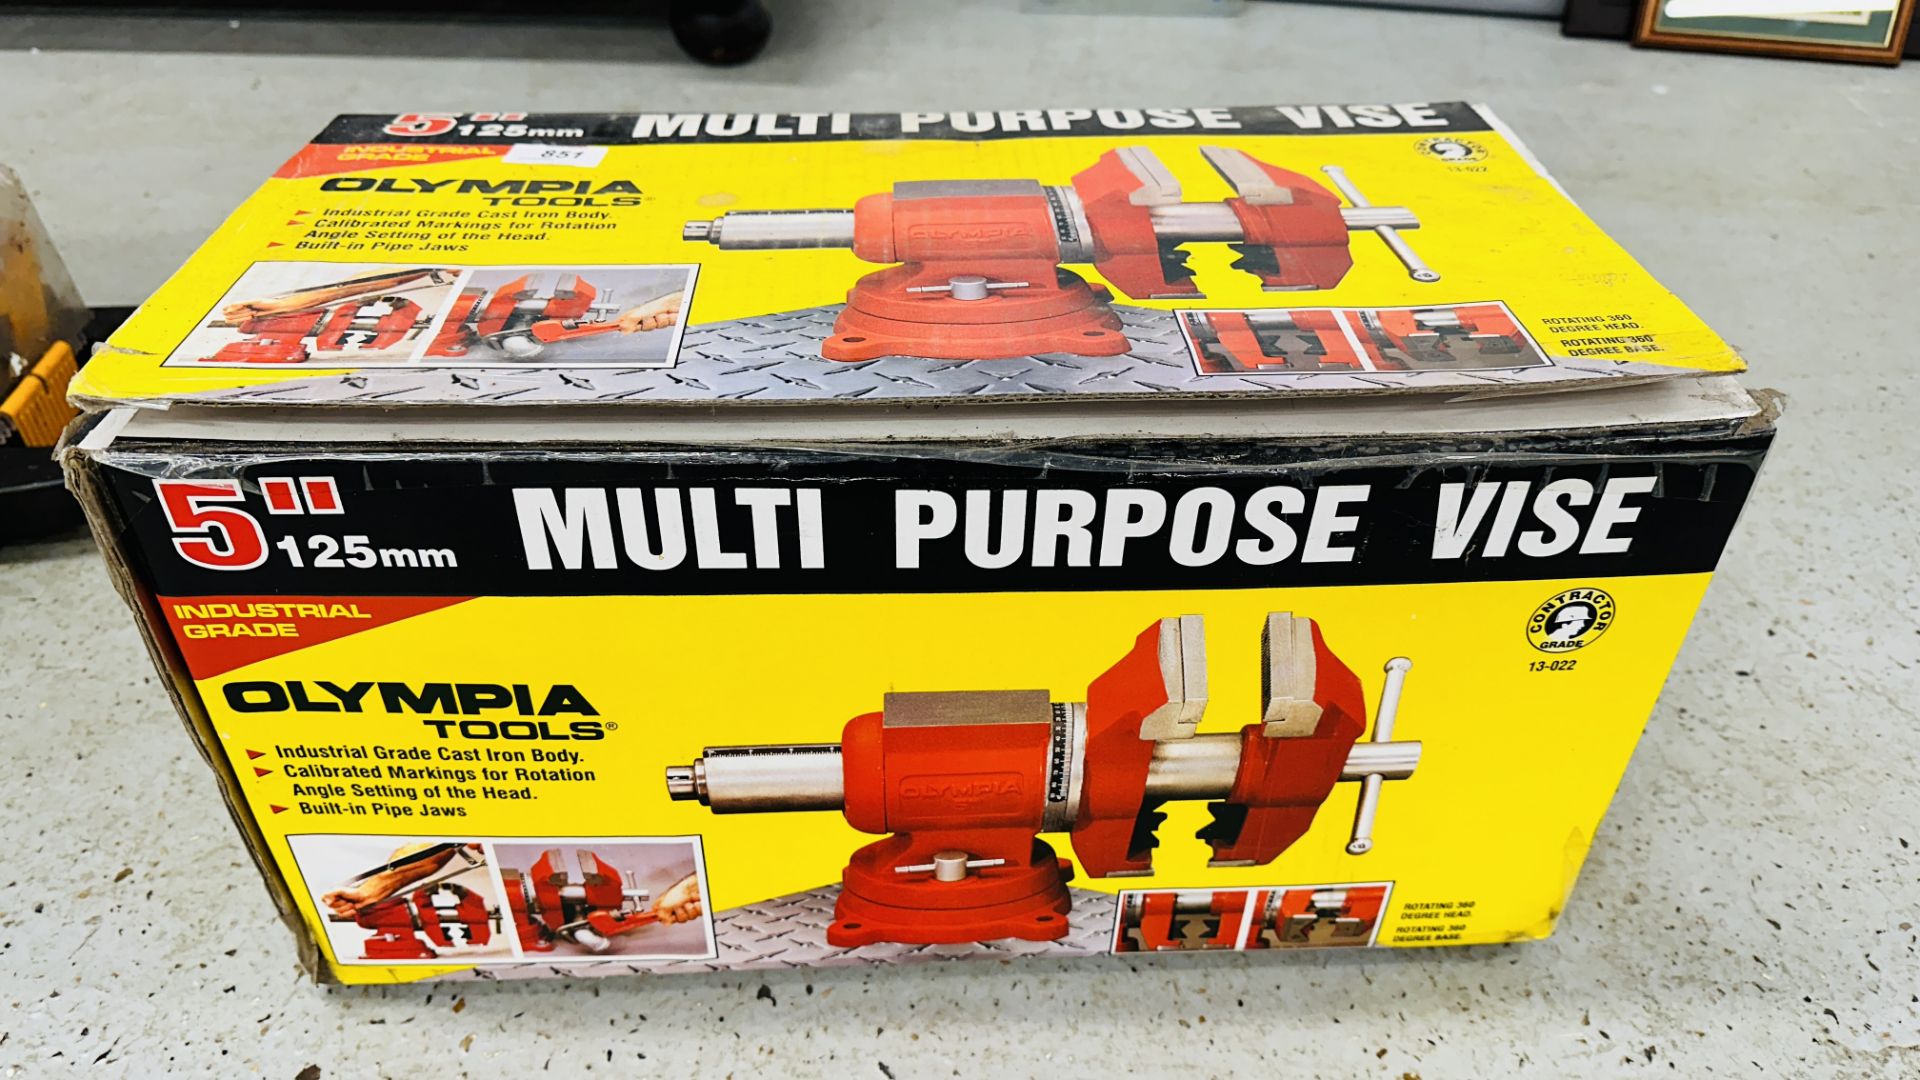 BOXED 5" MULTI PURPOSE VICE - SOLD AS SEEN. - Image 3 of 6